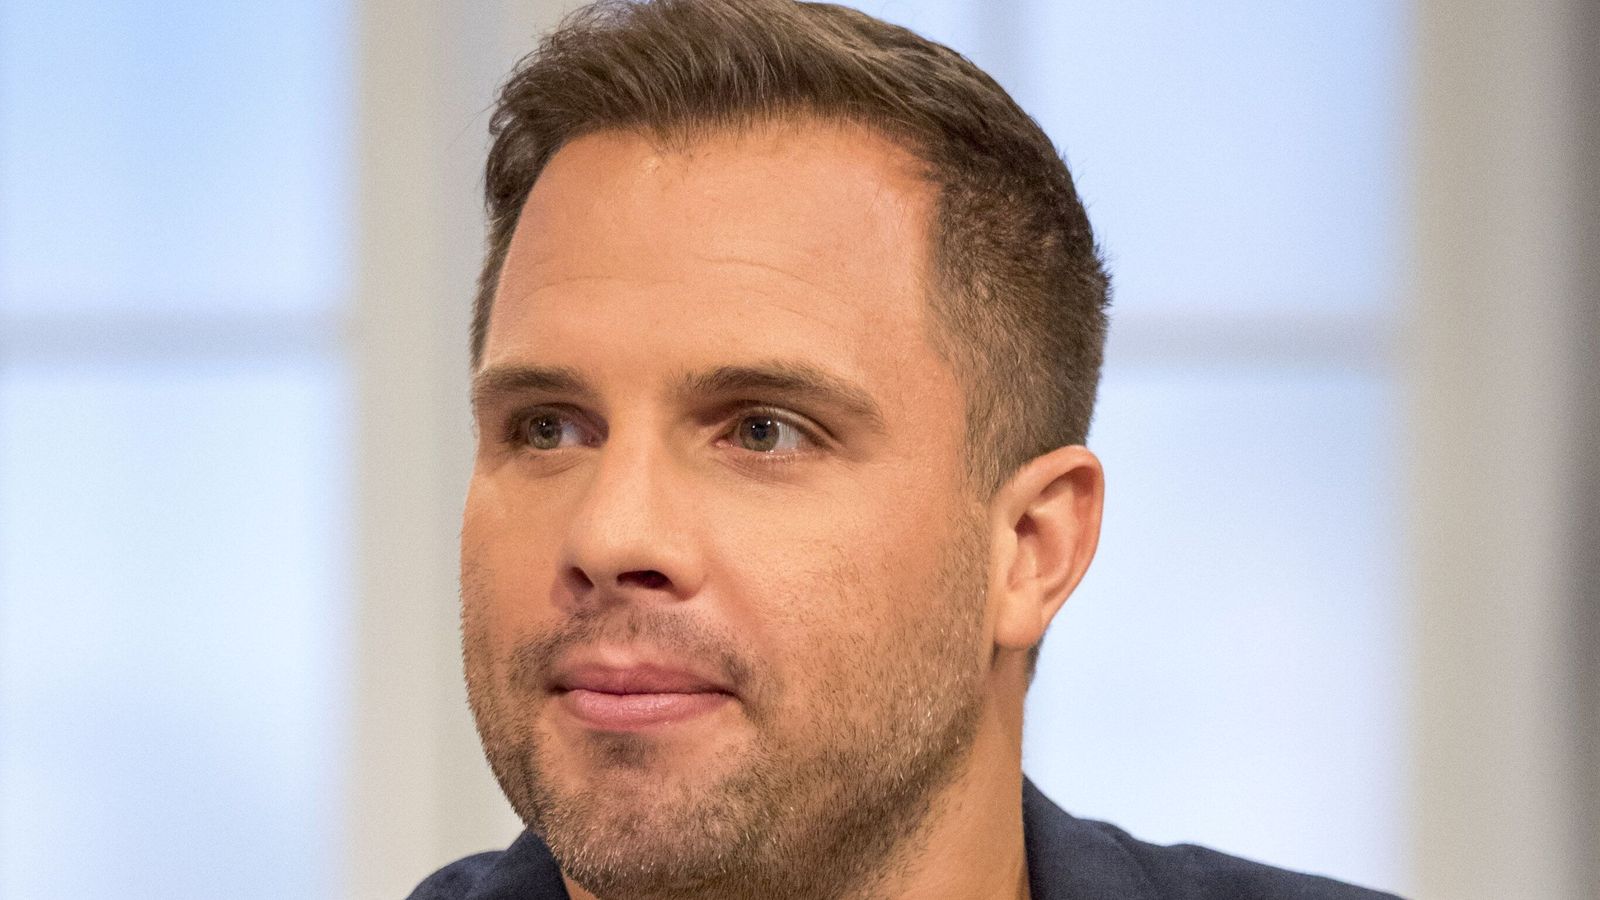 Dan Wootton's MailOnline column paused while personal conduct allegations investigated 